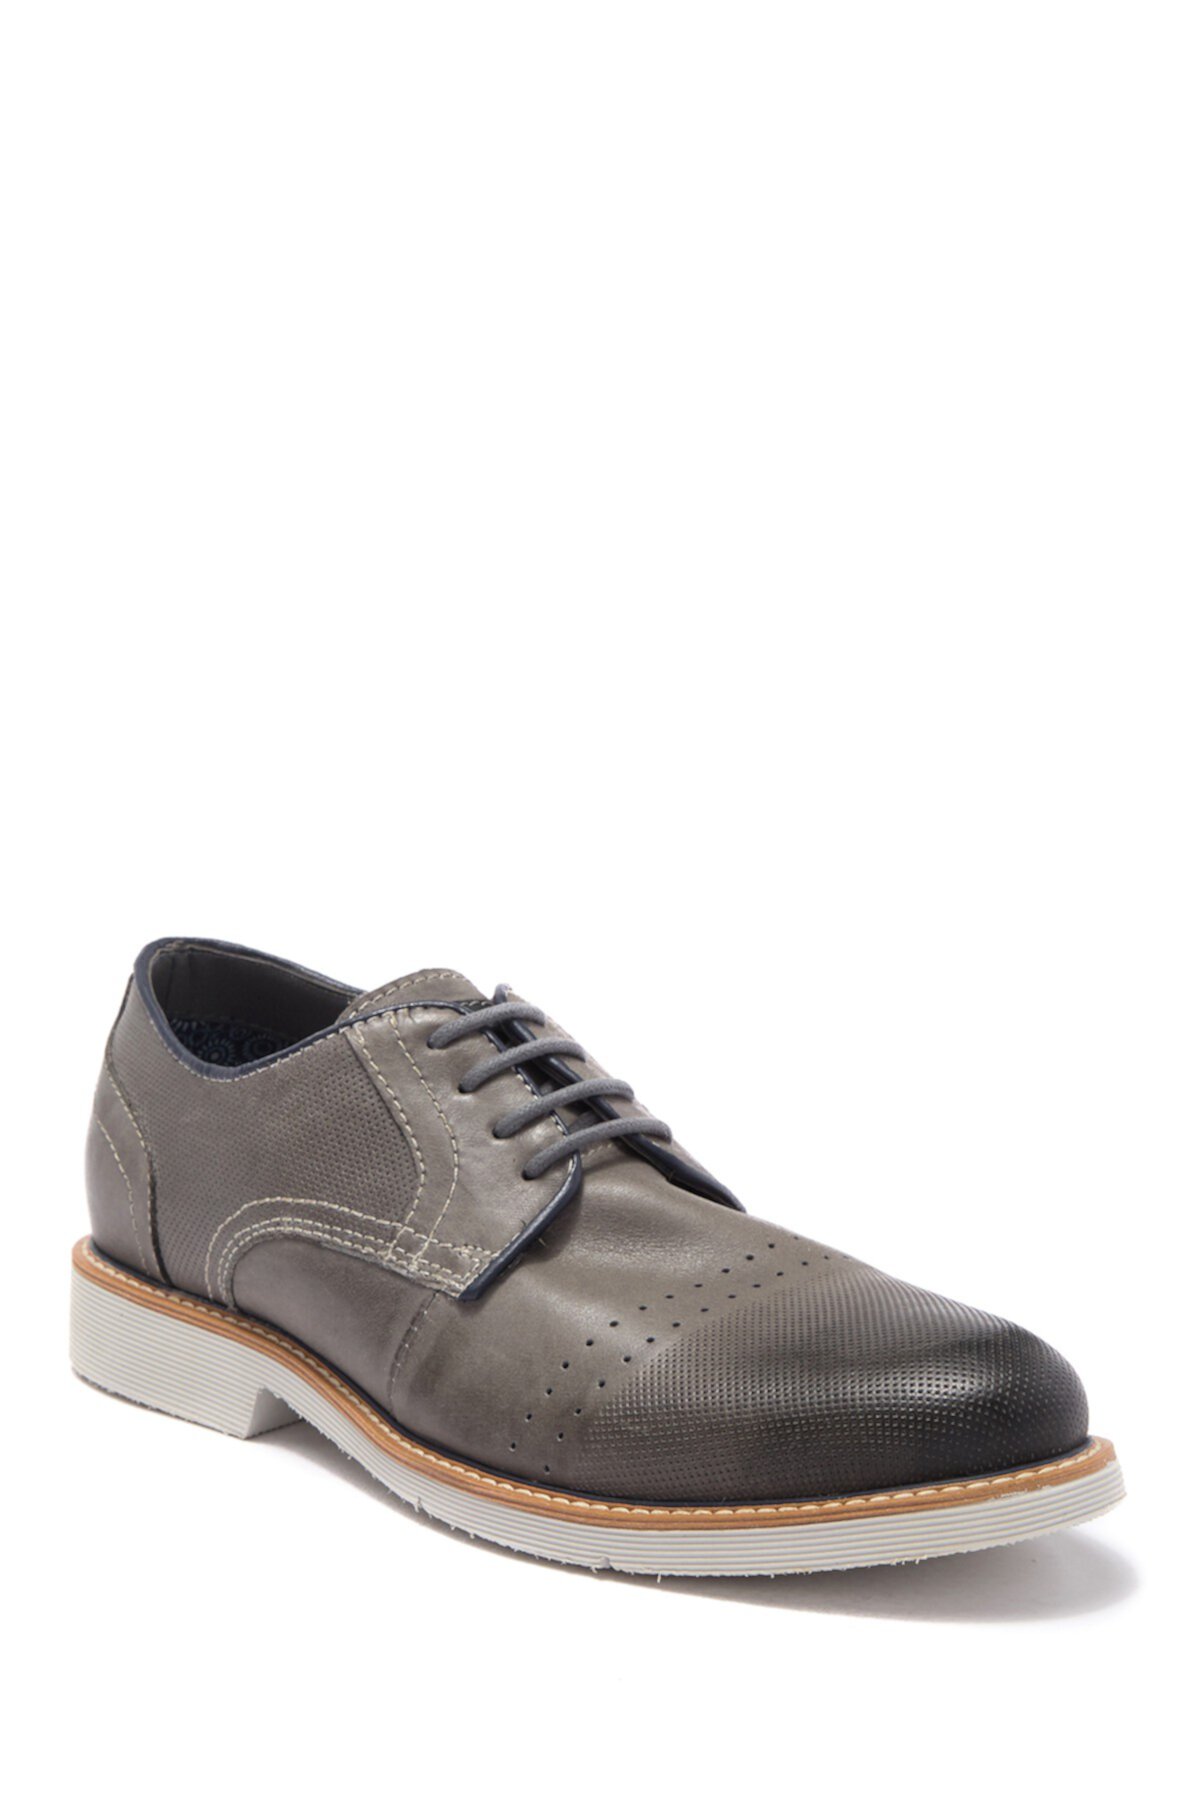 Beat Perforated Derby Steve Madden